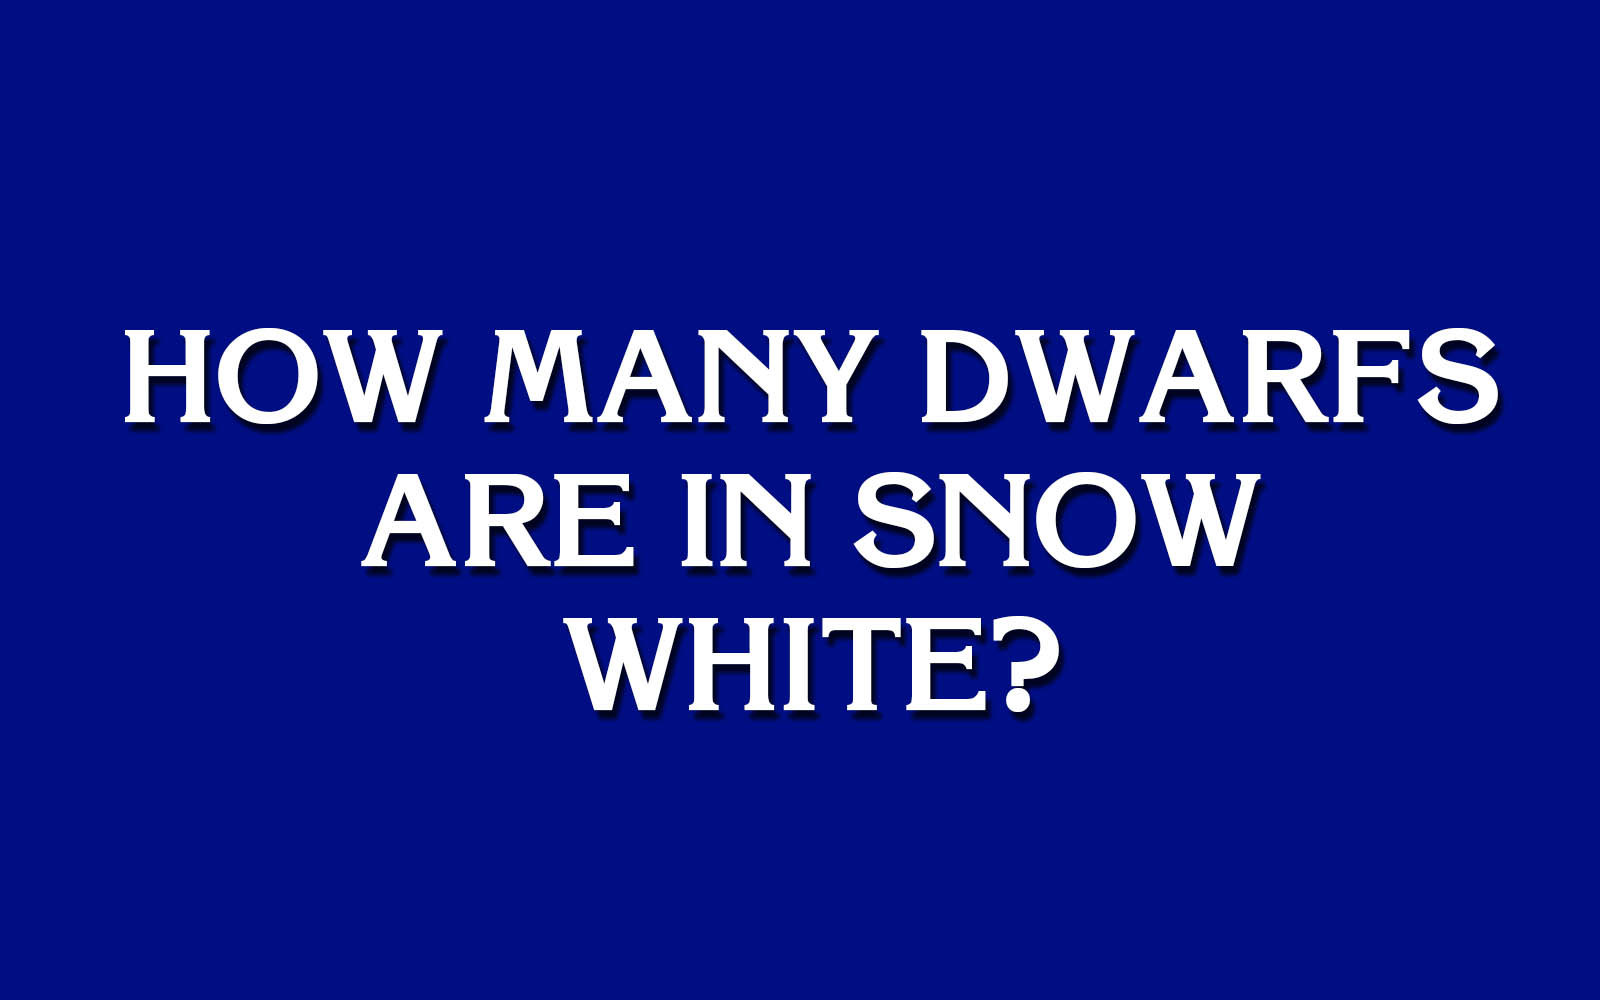 jeopardy game for school questions